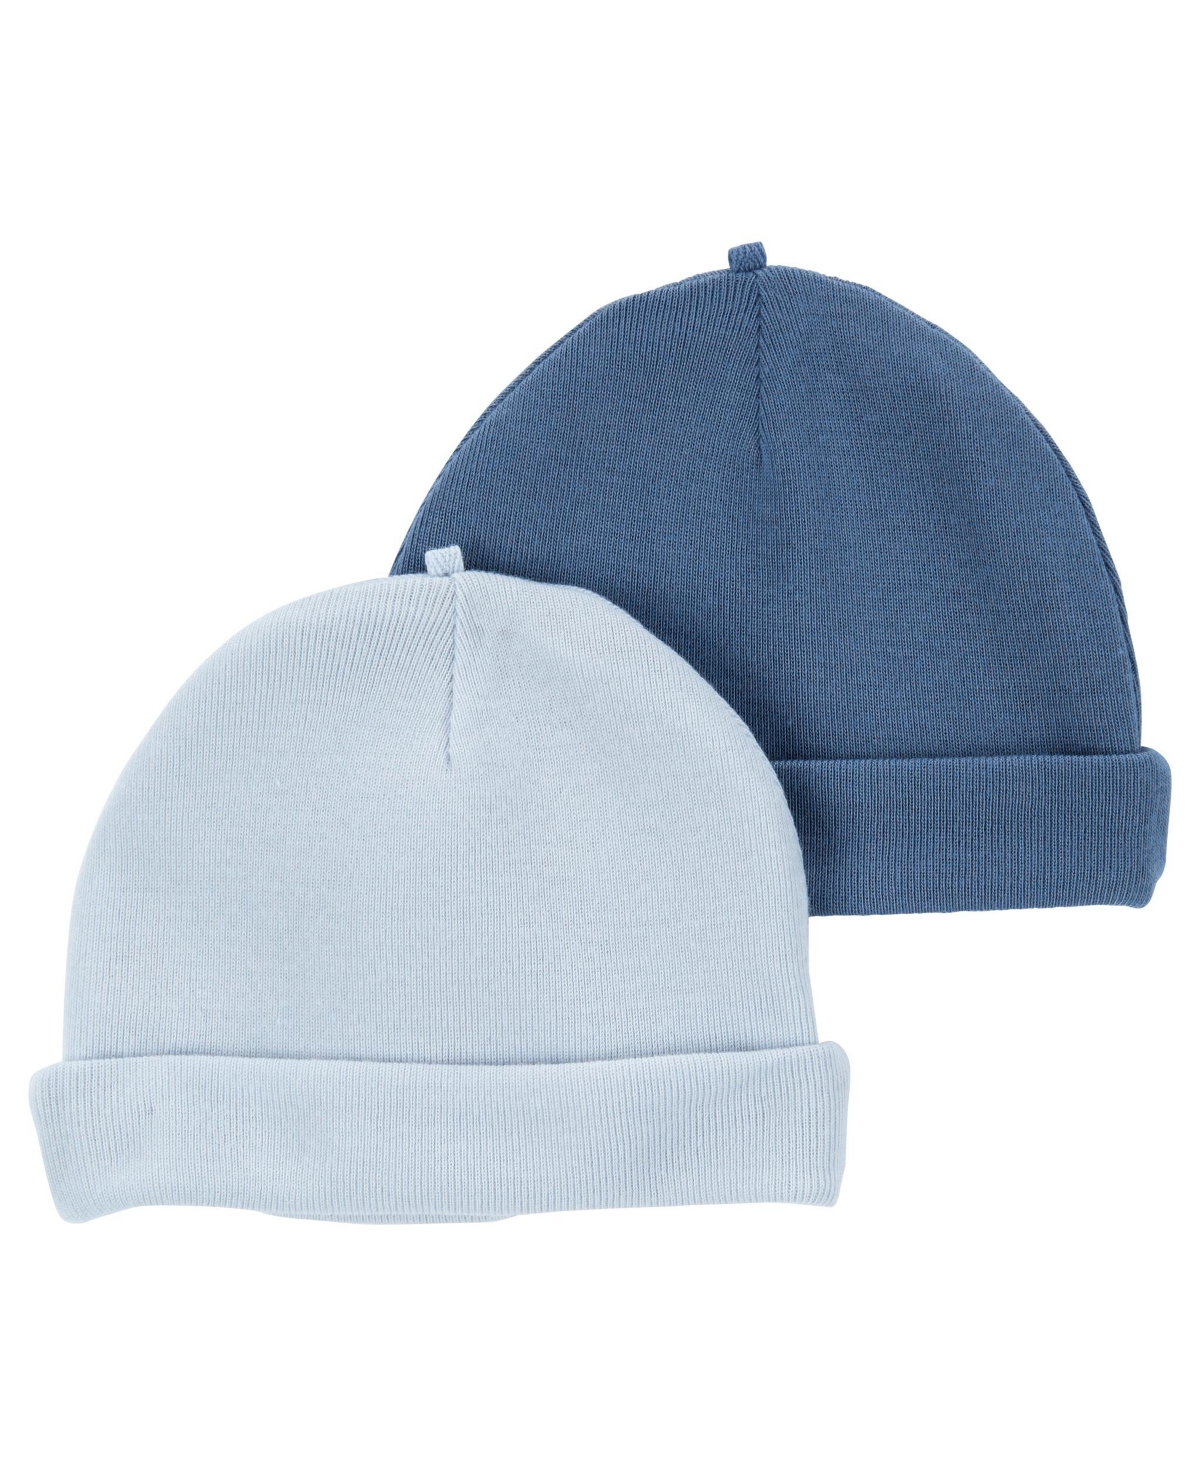 Carter's Baby Boys Rolled Cuff Hats, Pack Of 2 In Blue